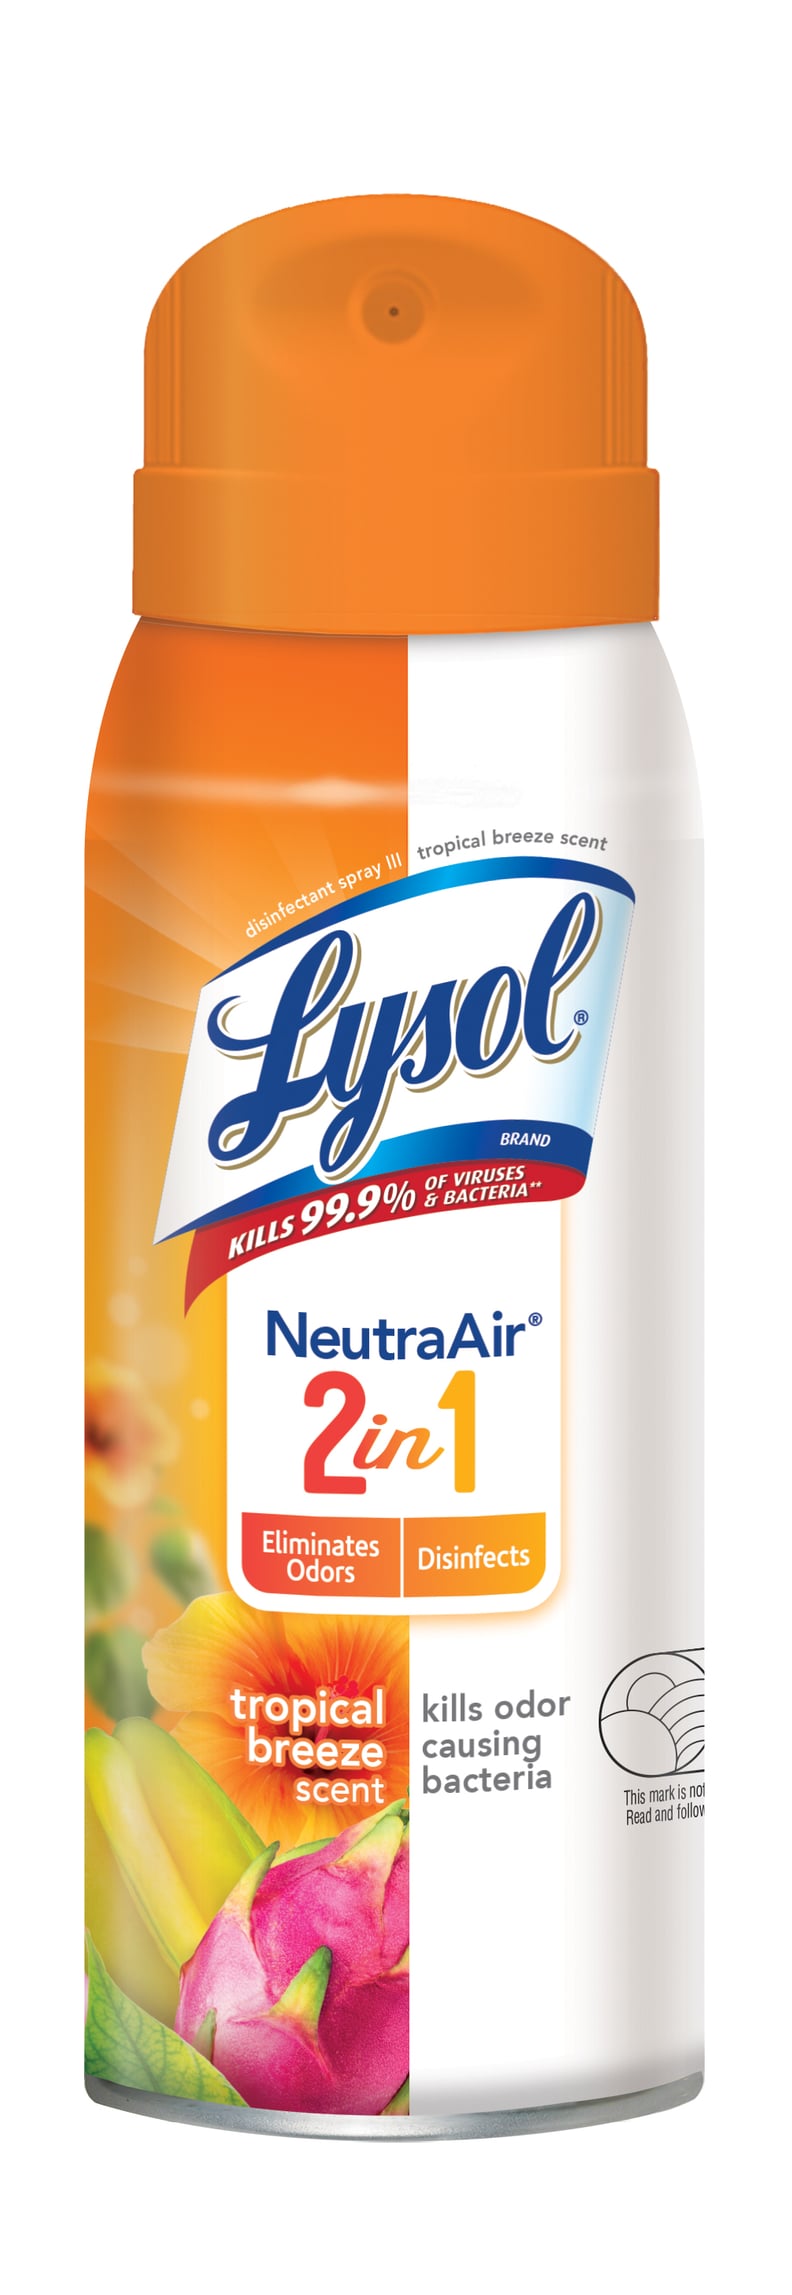 Lysol Disinfectant Spray, Neutra Air 2 in 1 — Tropical Breeze